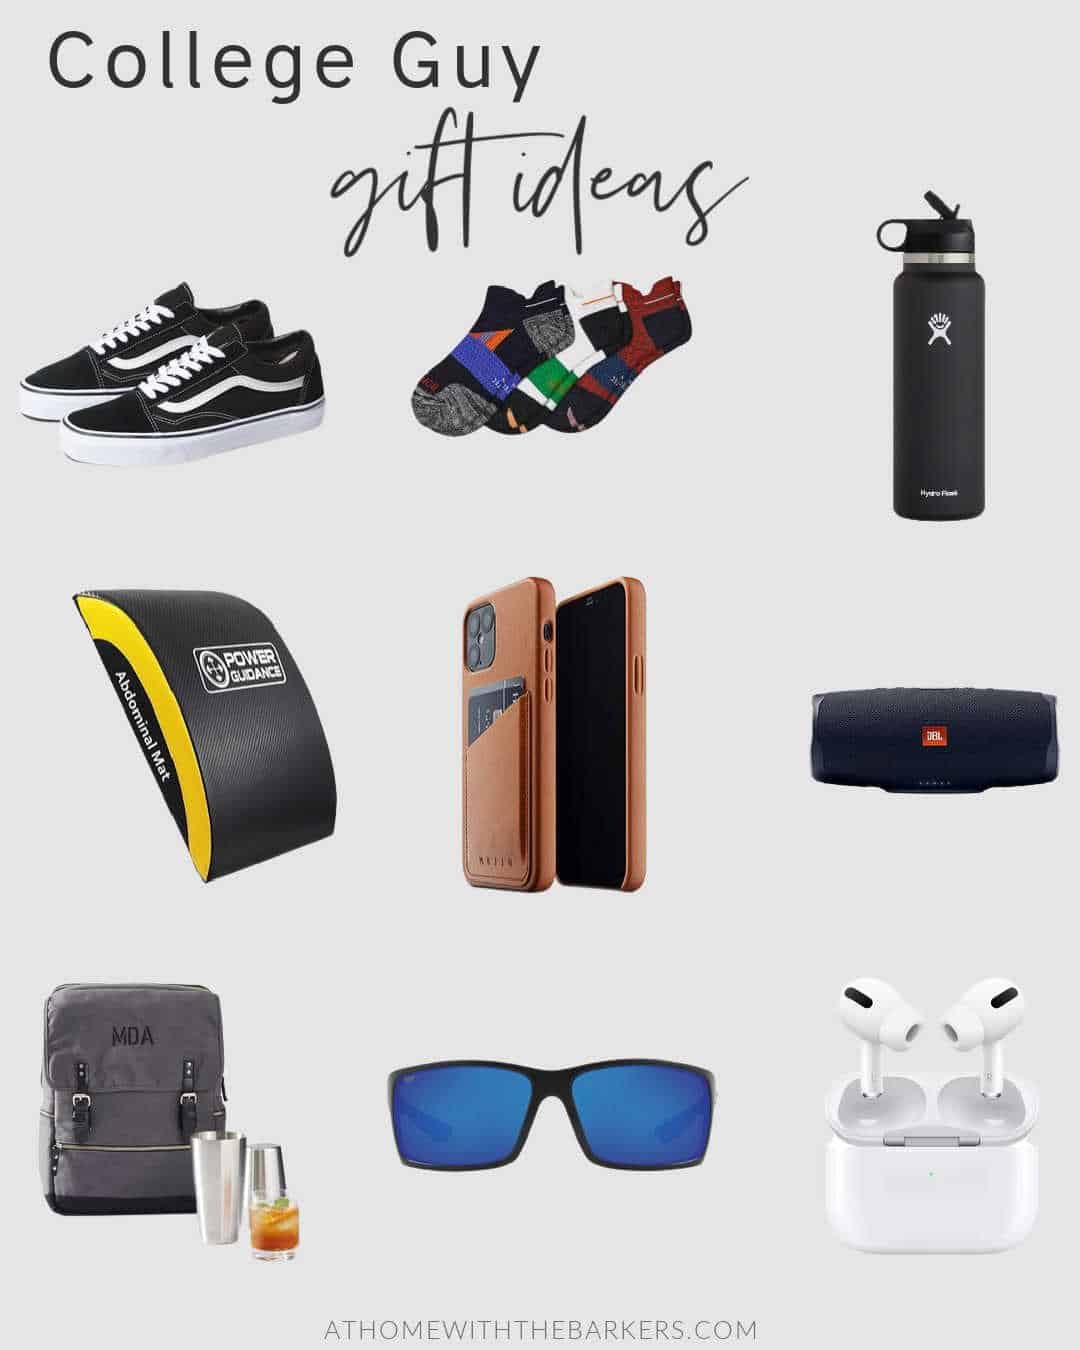 College Guy Gift Guide 2021